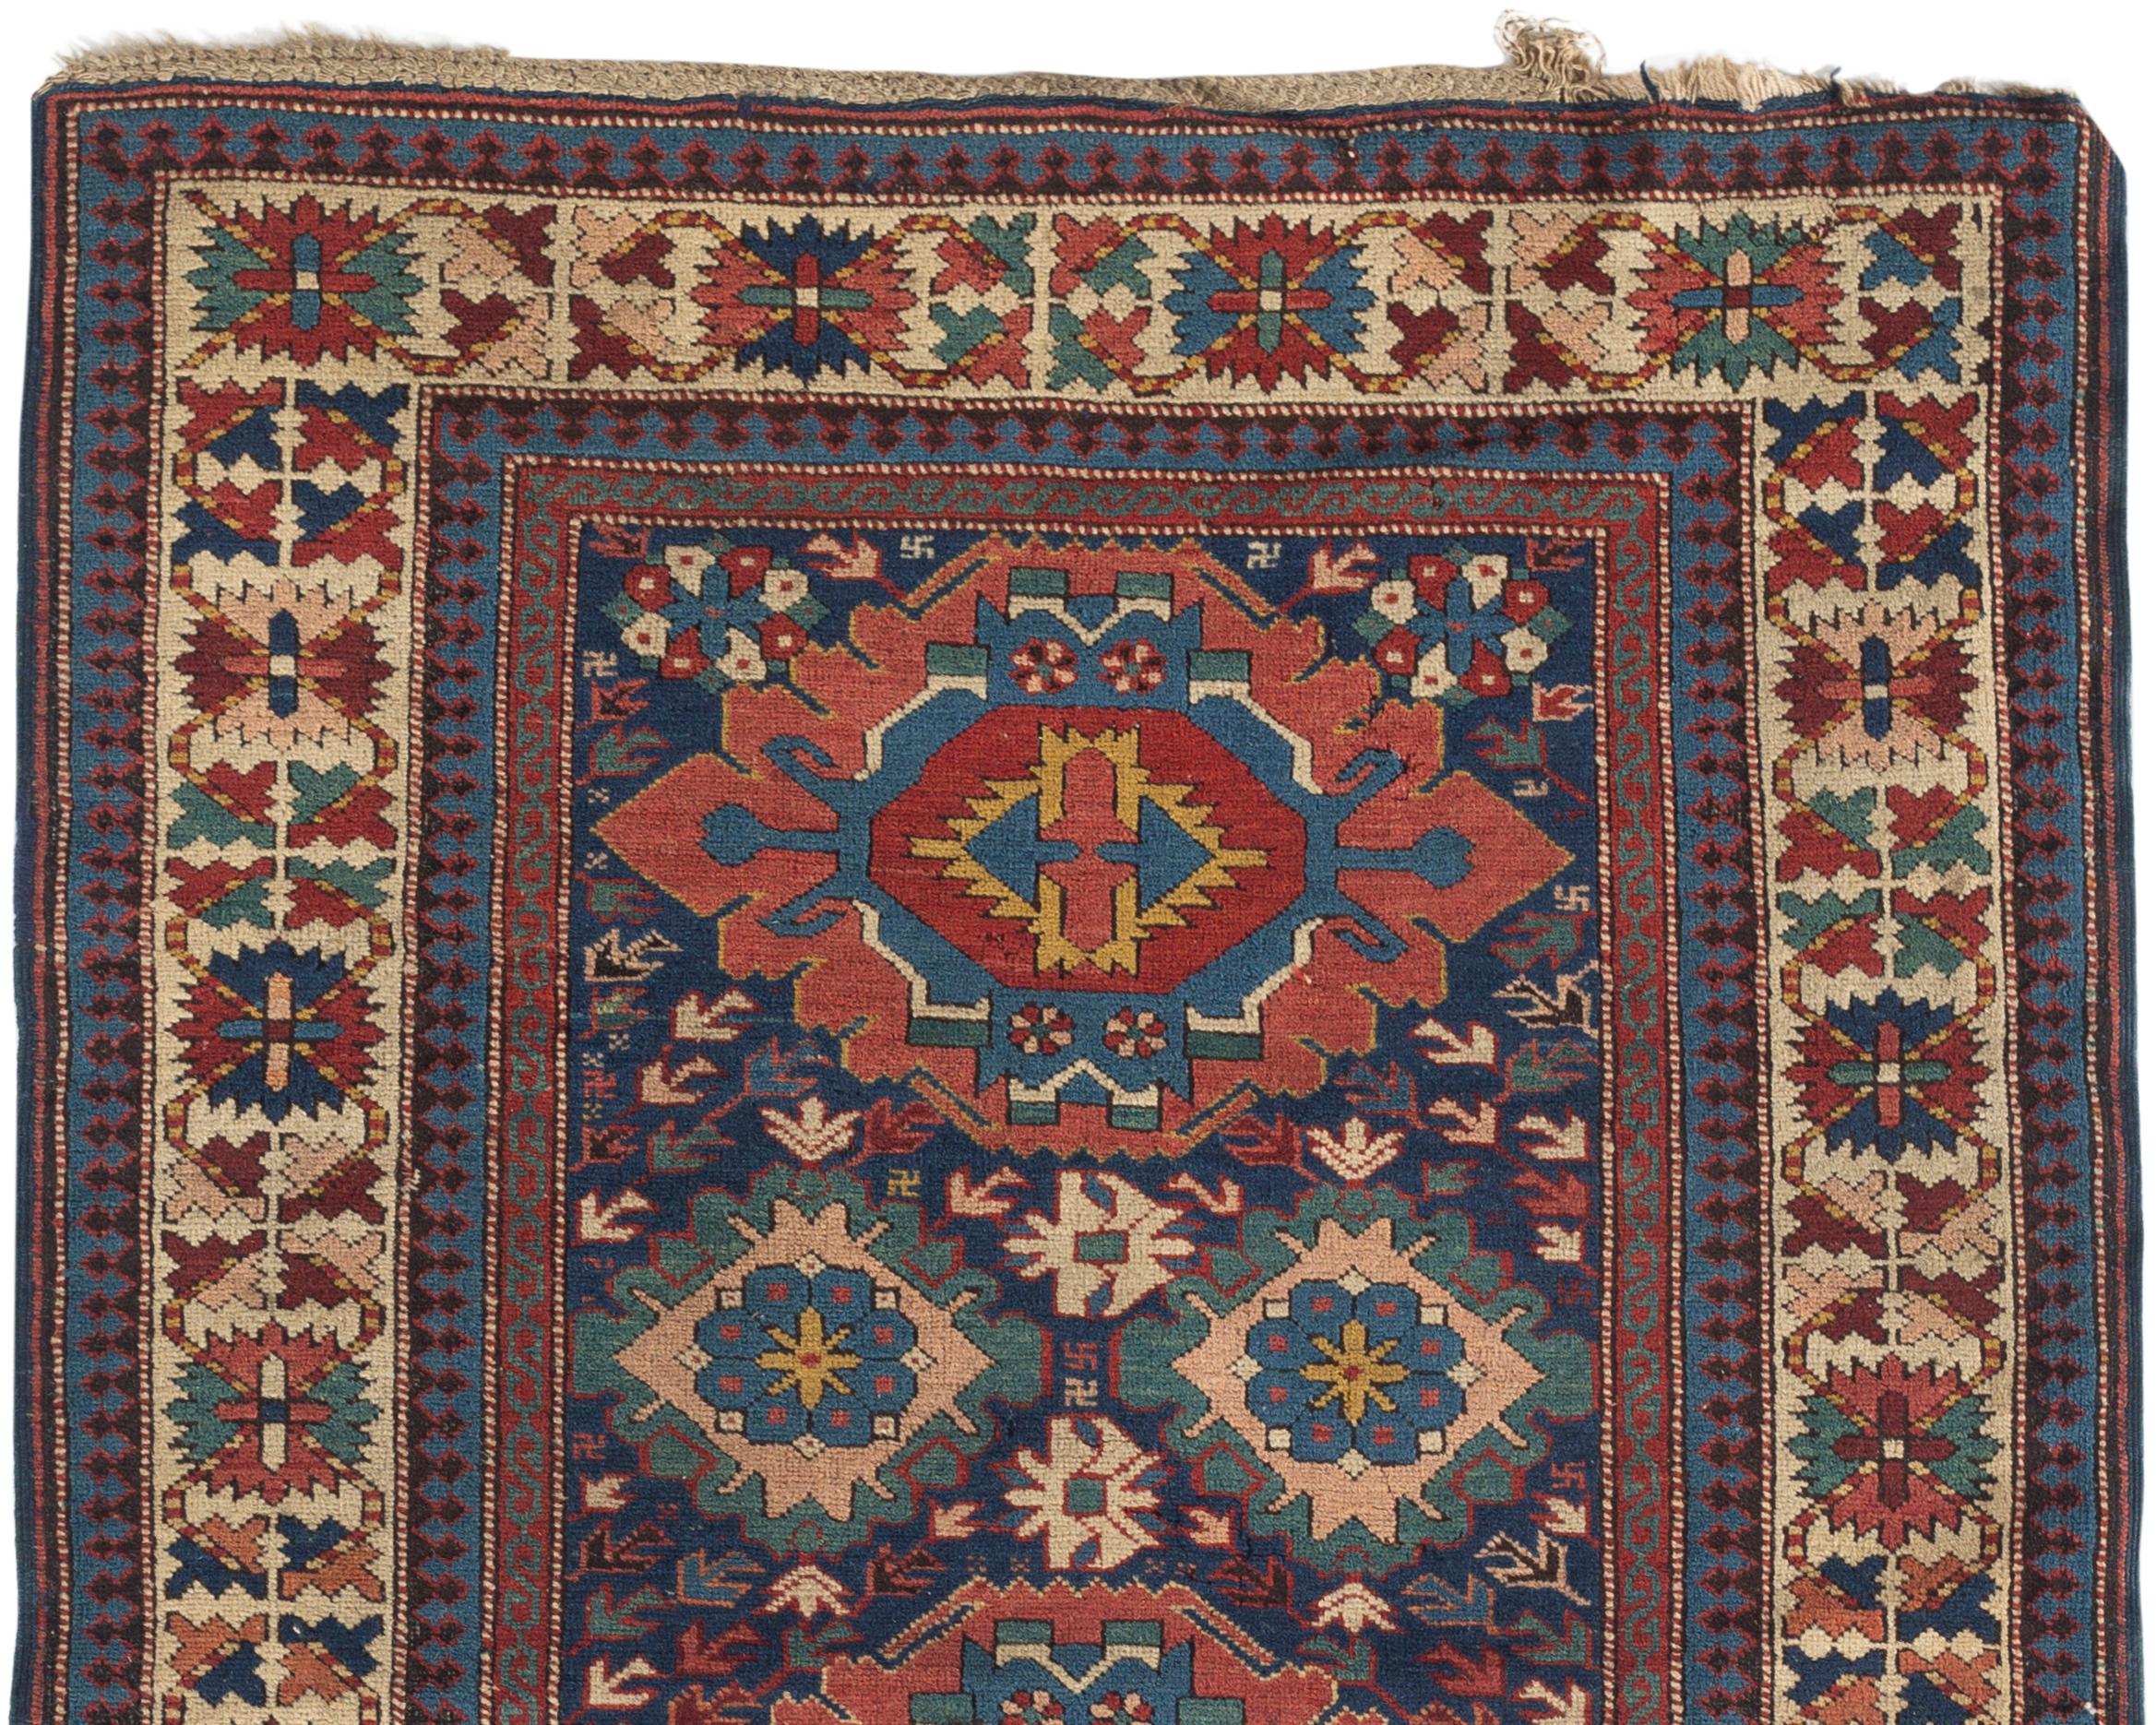 Antique Caucasian Shirvan rug, circa 1880. These types of antique Caucasian rugs were woven in the eastern part of the region, mostly along the west coast of the Caspian sea and show in the design, the ethnic style associated with Caucasian pieces.